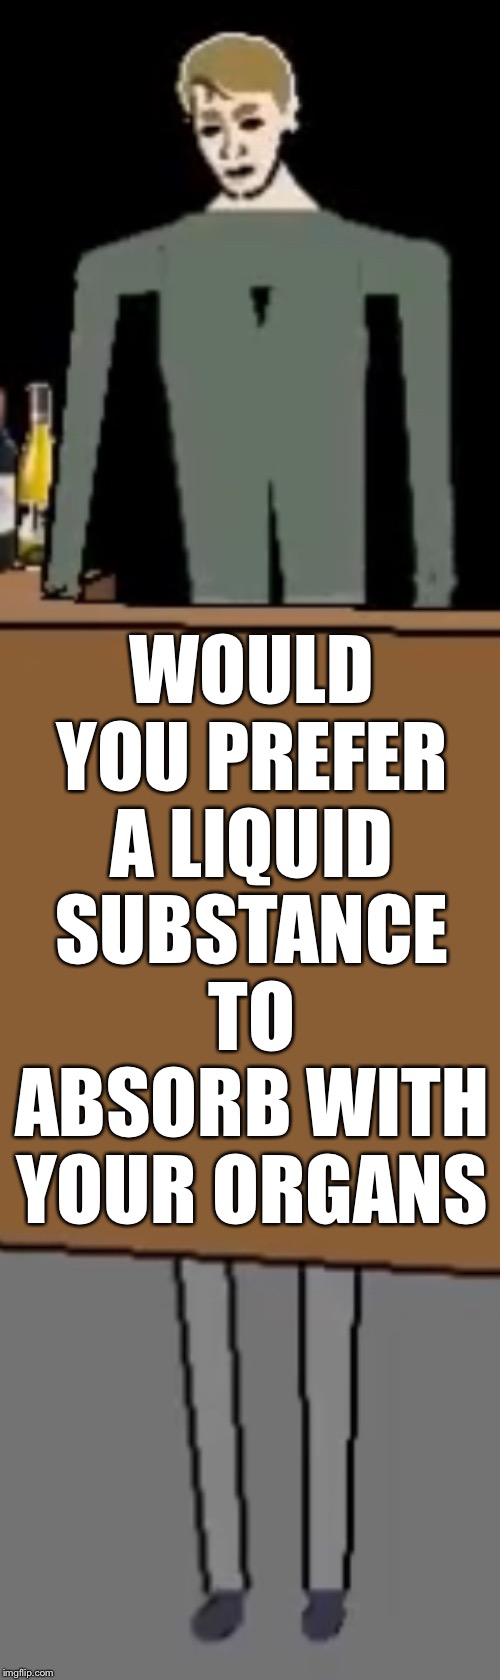 Would you like a drink? | WOULD YOU PREFER A LIQUID SUBSTANCE TO ABSORB WITH YOUR ORGANS | image tagged in would you prefer | made w/ Imgflip meme maker